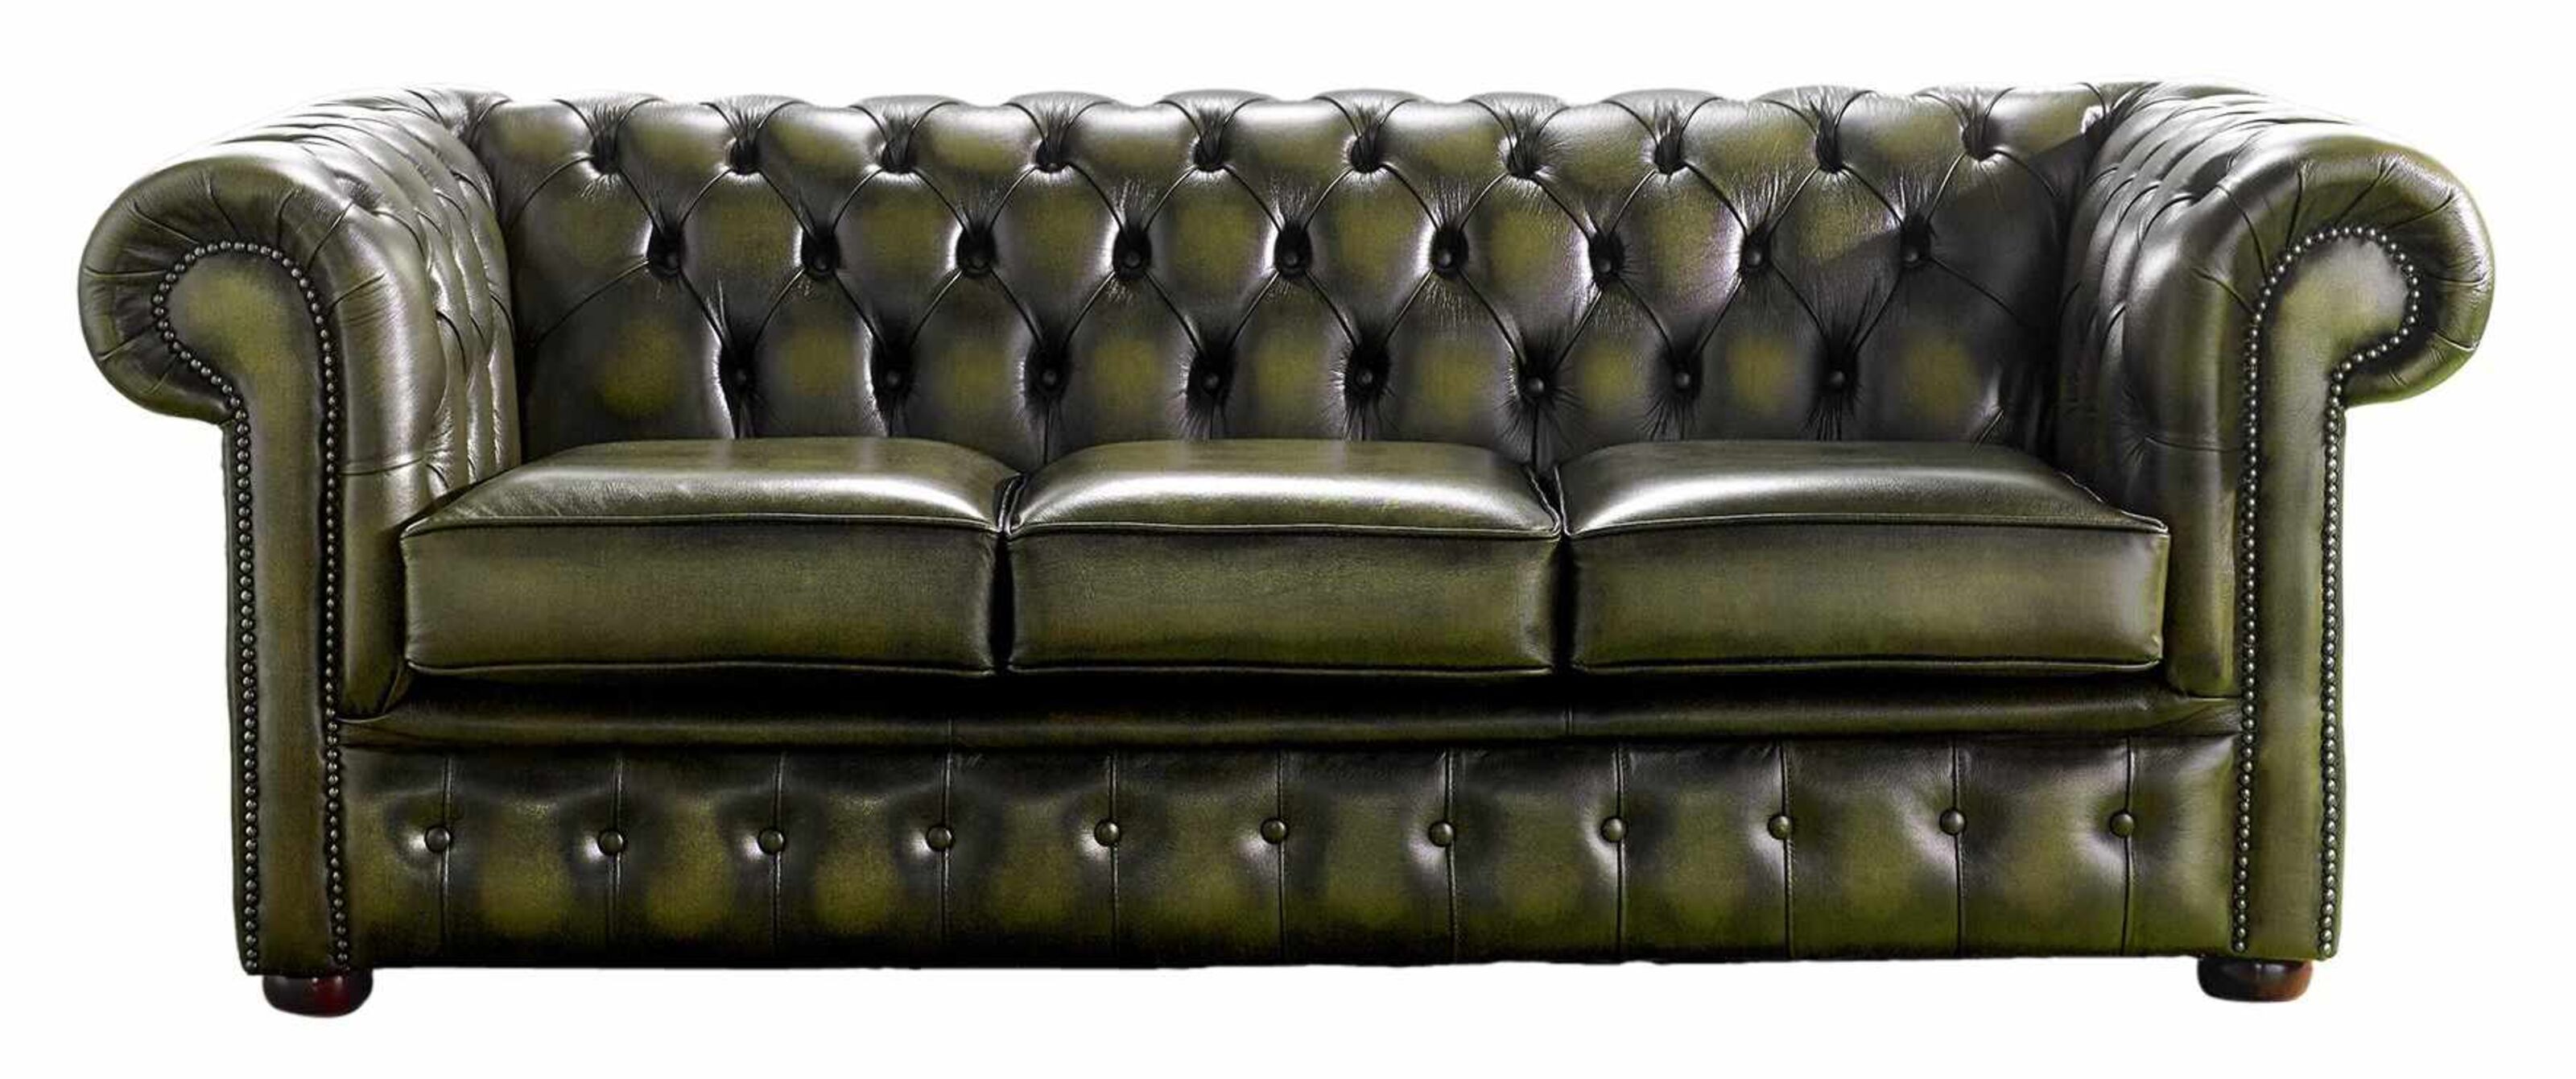 Classic Chesterfield Sofas Discover Auction Treasures  %Post Title